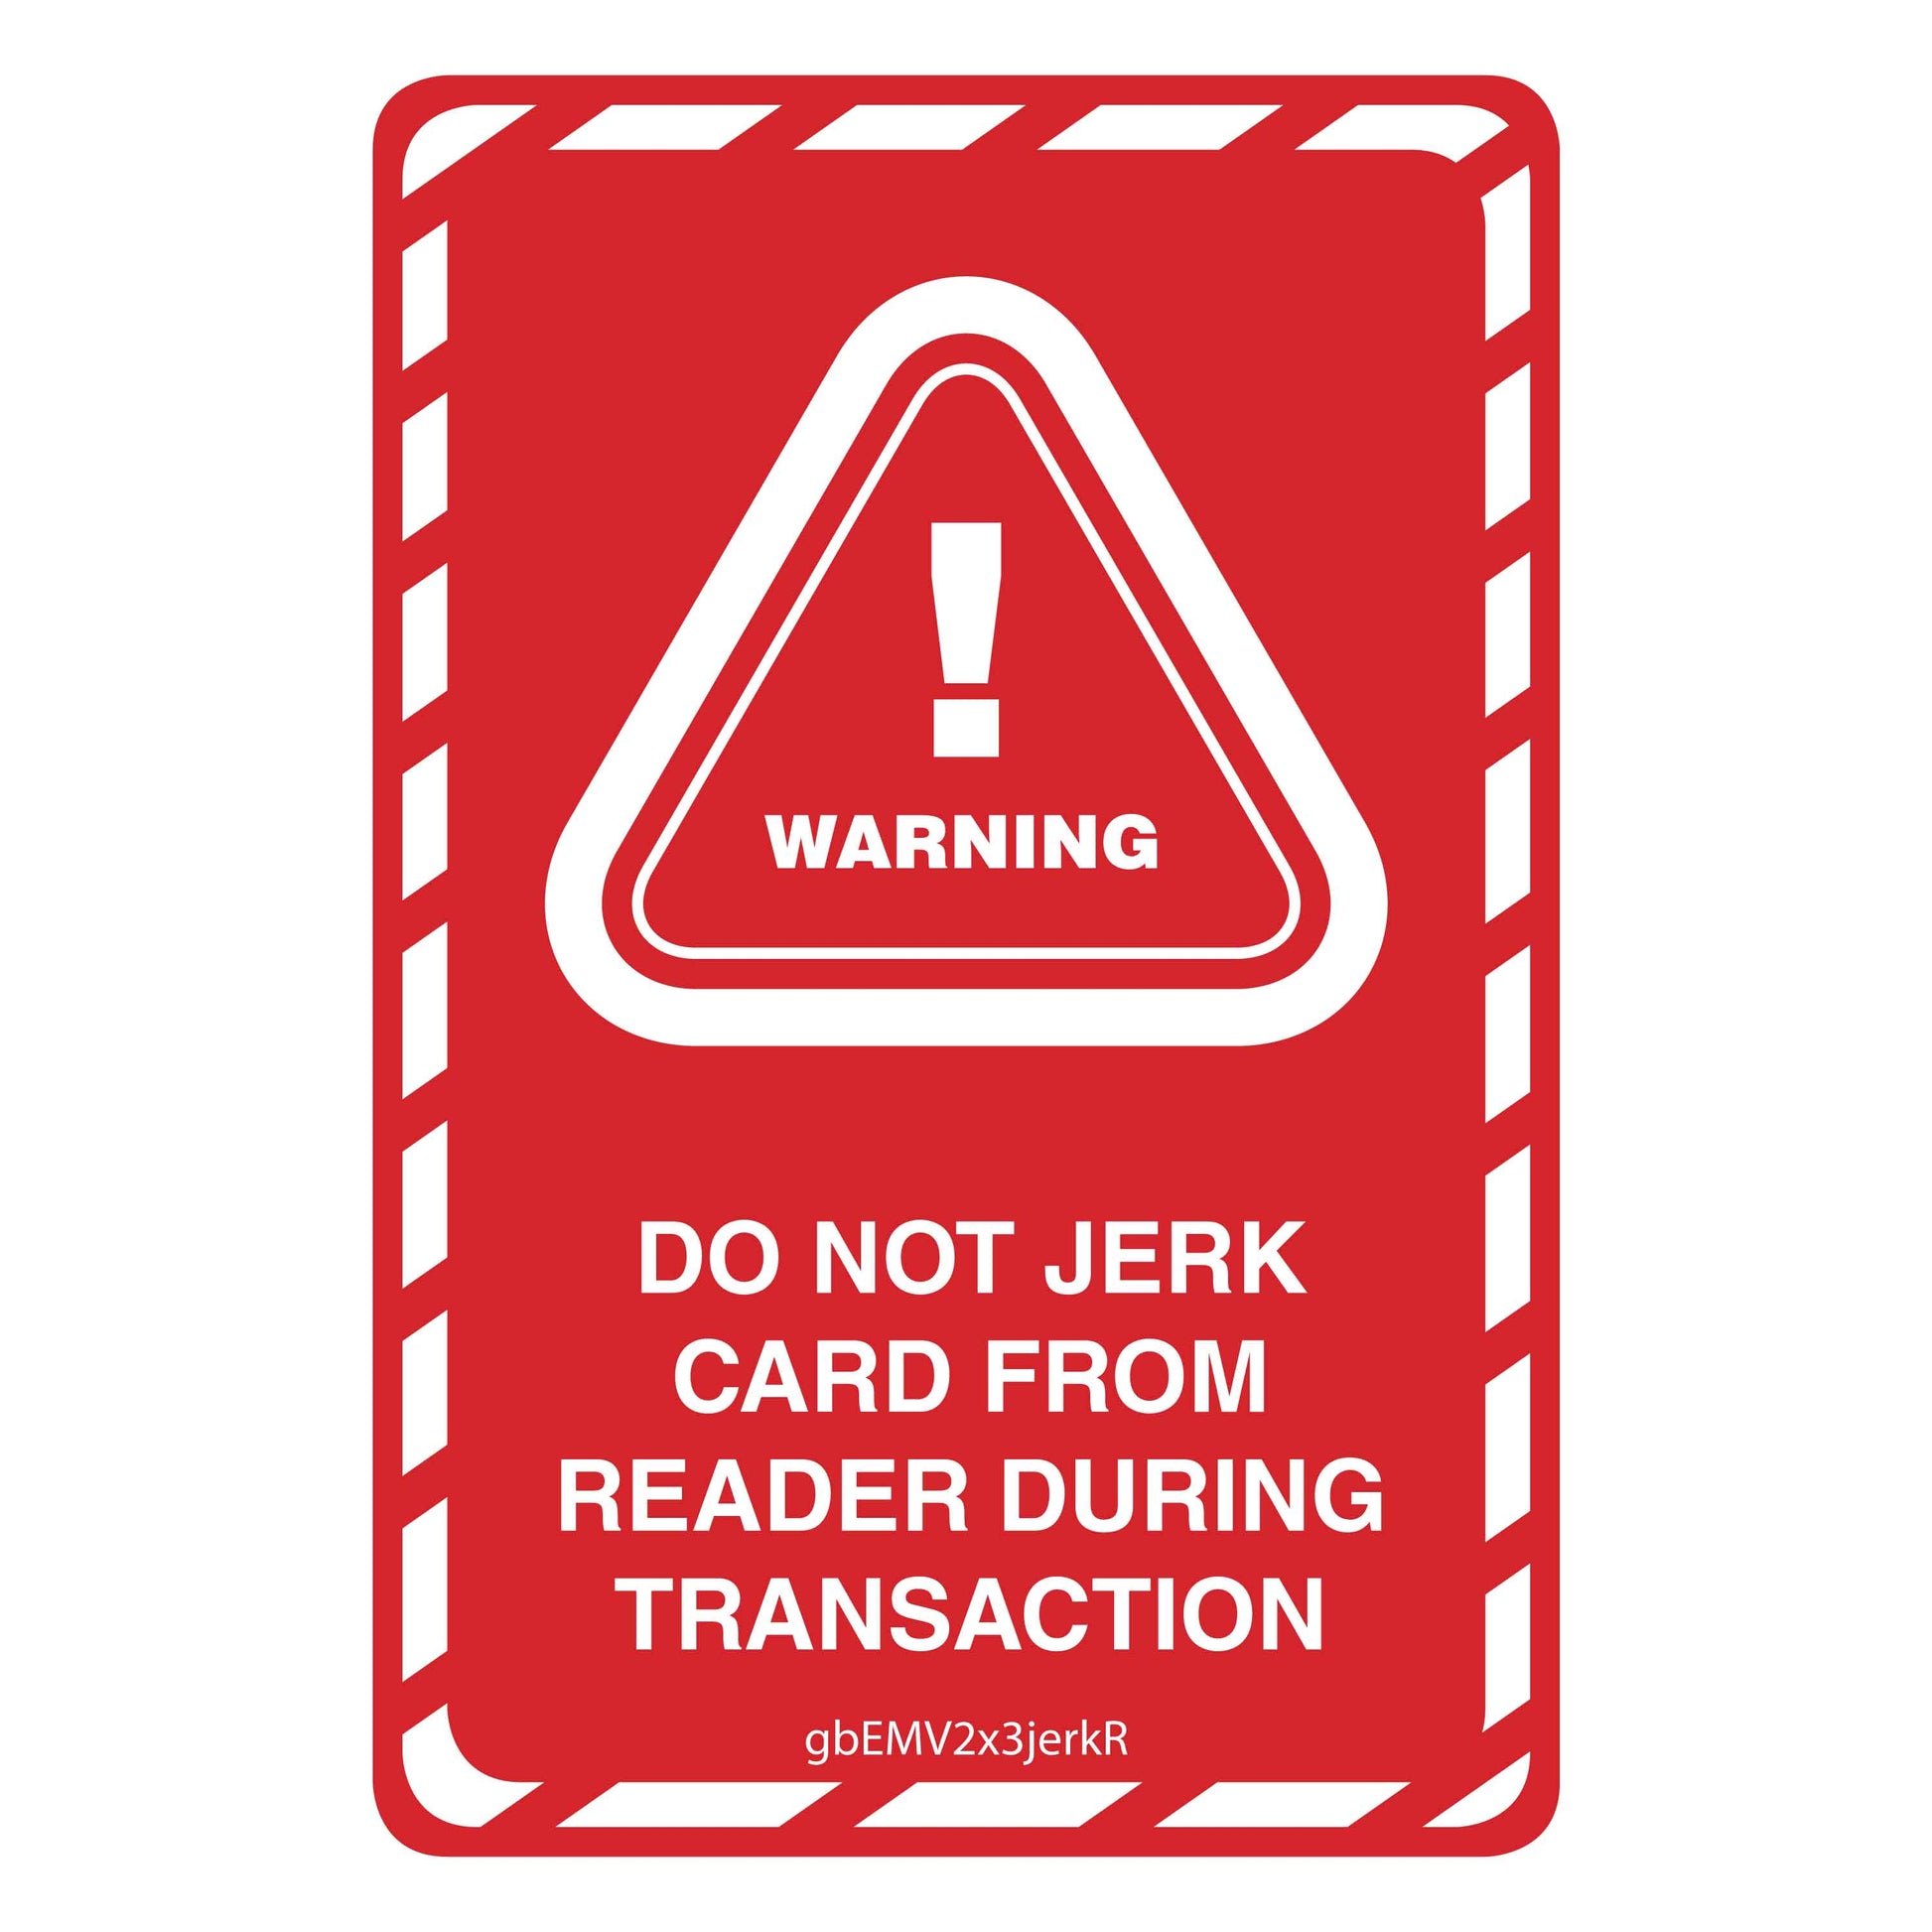 EMV Decal Red/White - Warning: Don't Jerk Card. 2 inches by 3 inches in size. 